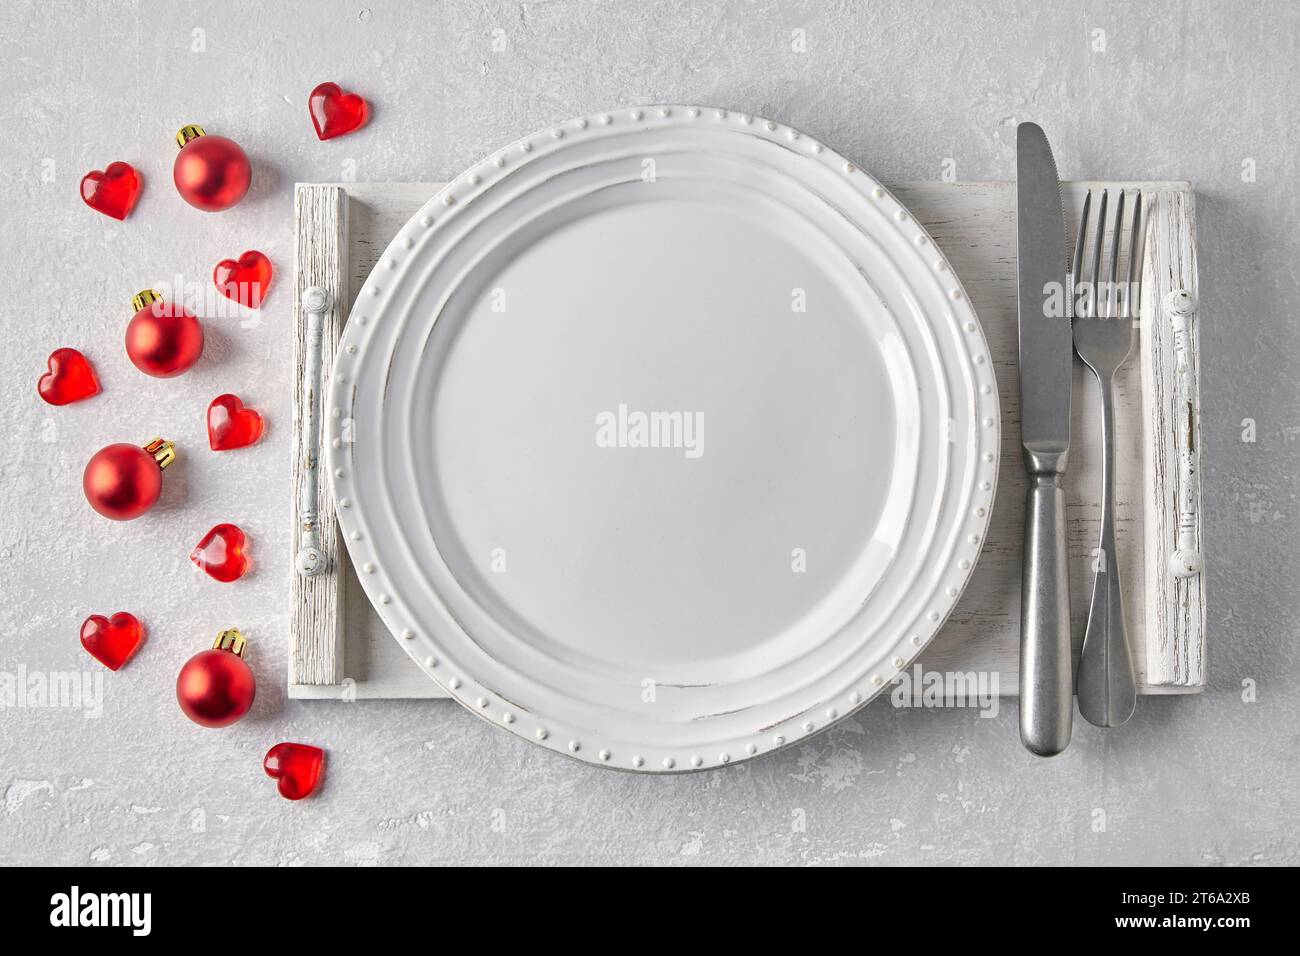 Empty white plate with cutlery on a white wooden tray on a gray concrete table surrounded by red Christmas balls and hearts. Template for presenting f Stock Photo